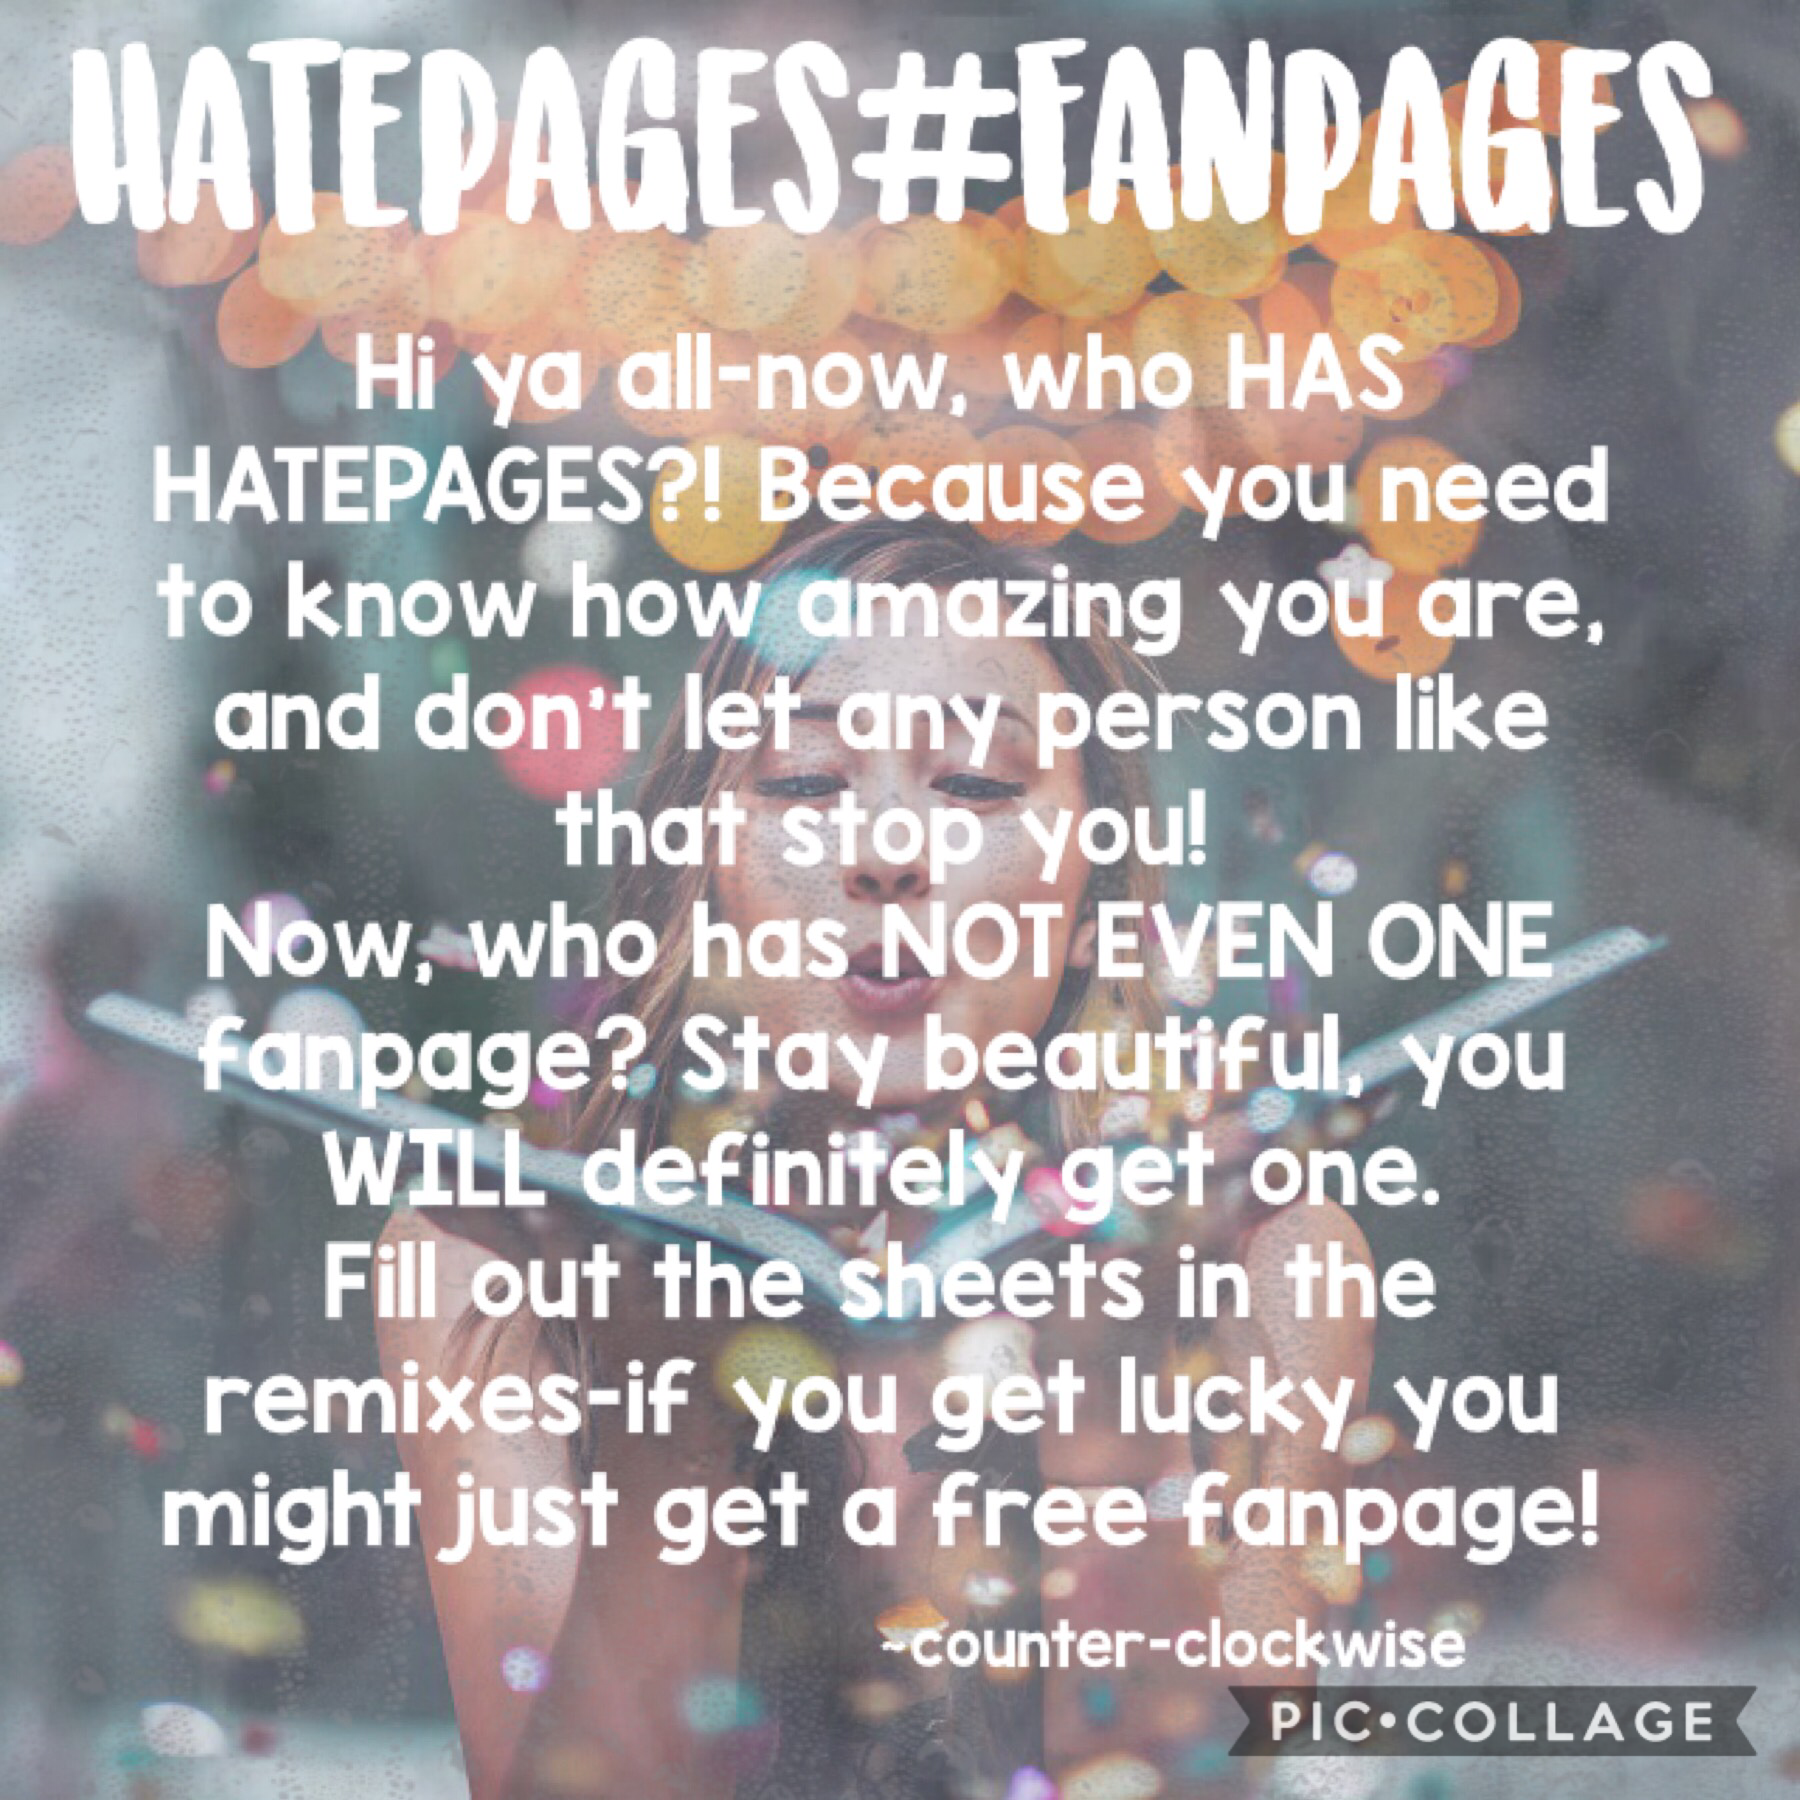 Tapyy
Hatepages#Fanpages

Fill in the sheet in remixes and I’ll see your situation-also comment if you want your hatepage to be dealt with AND also a new fanpage. :)